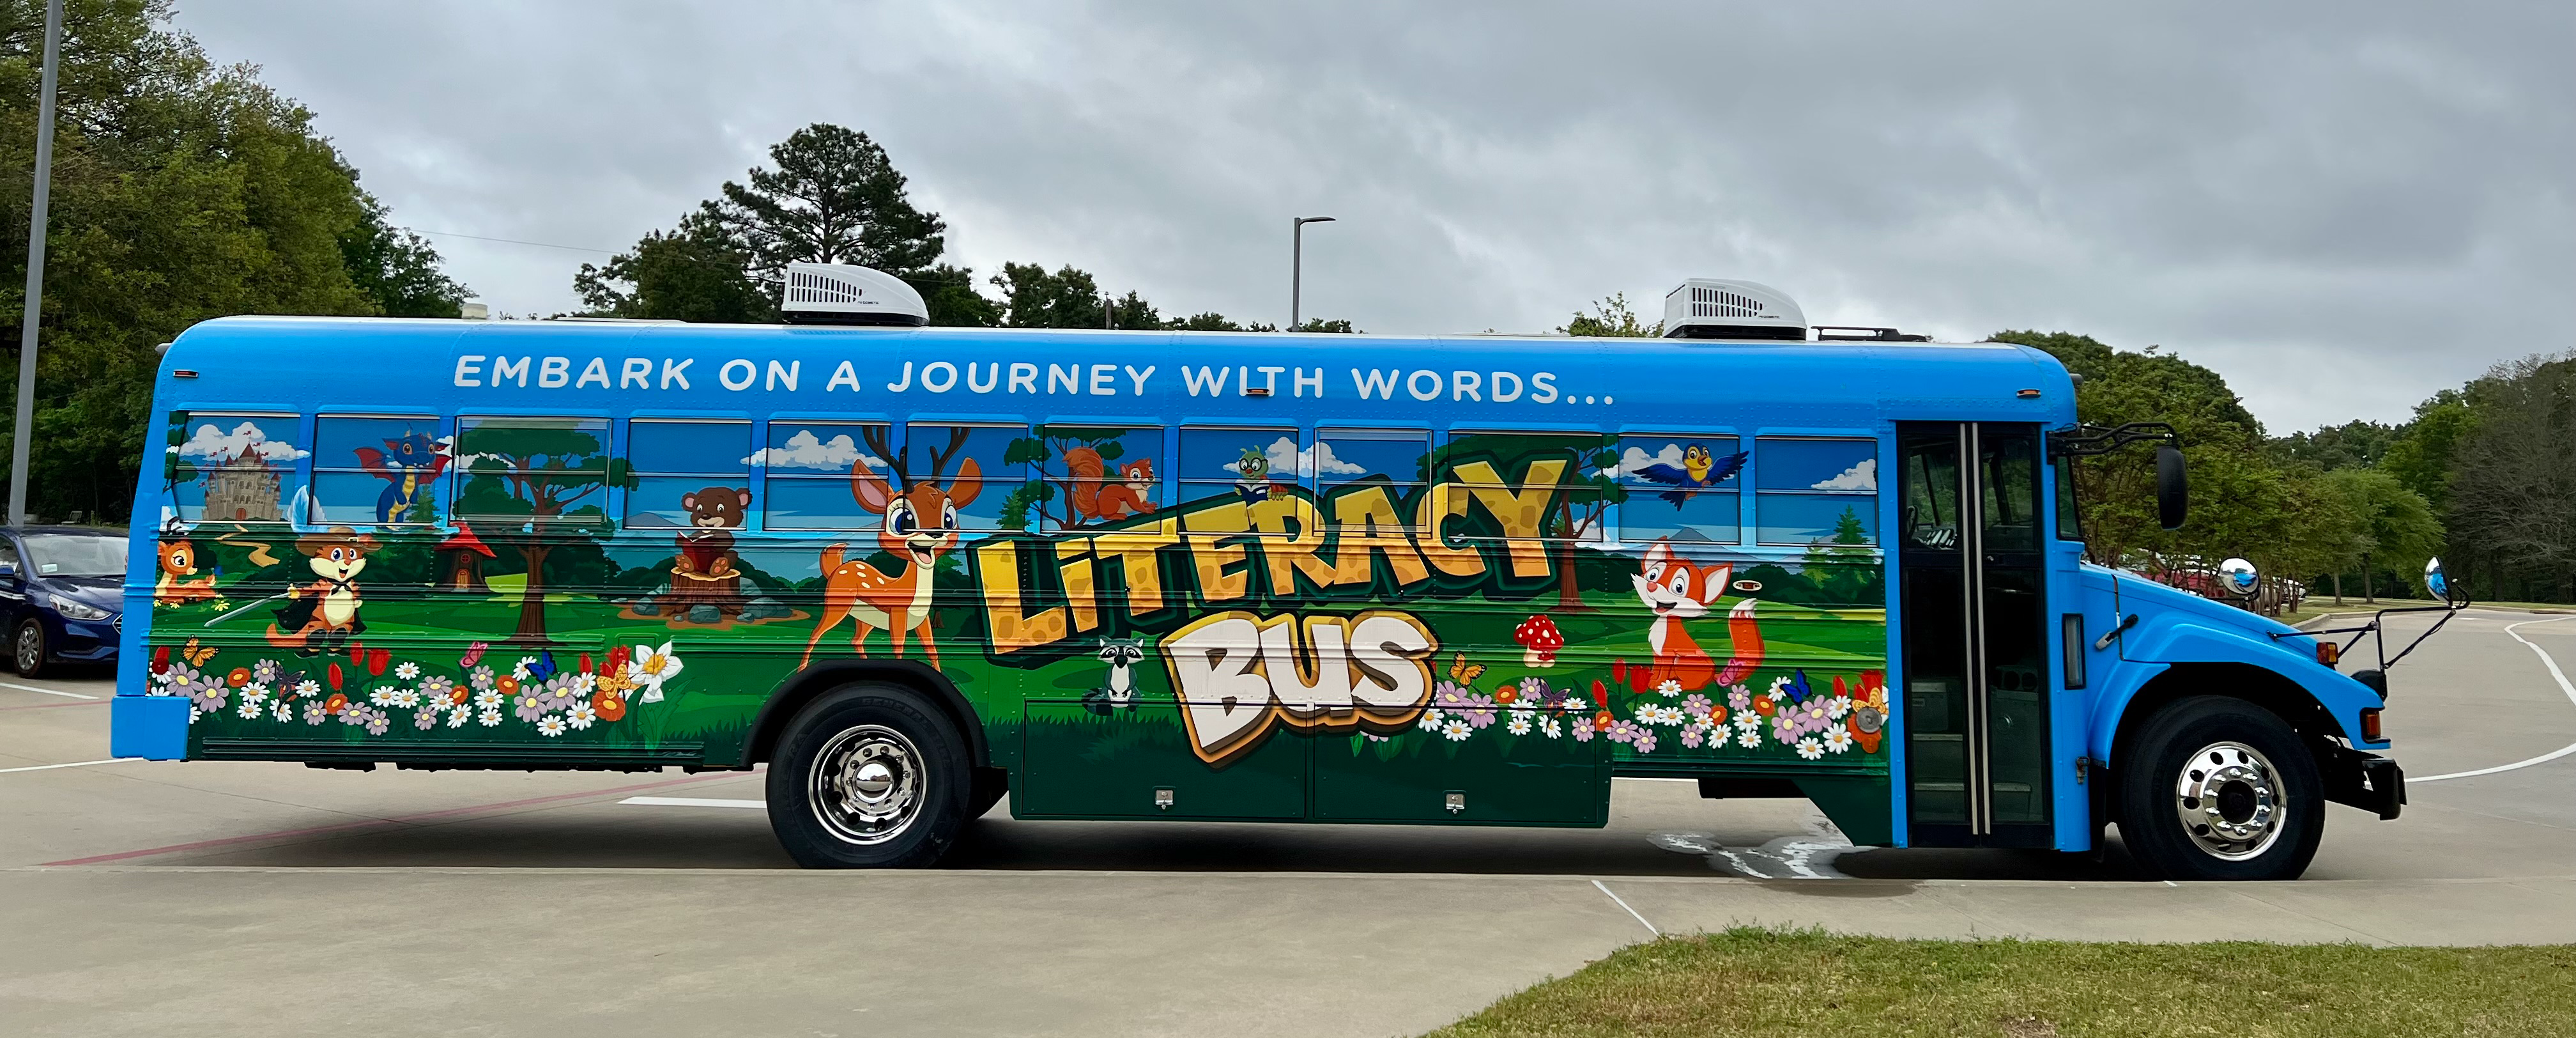 embark on a journey with words...Literacy Bus - school bus painted blue with flowers, deer, bear, fox, birds, trees, grass